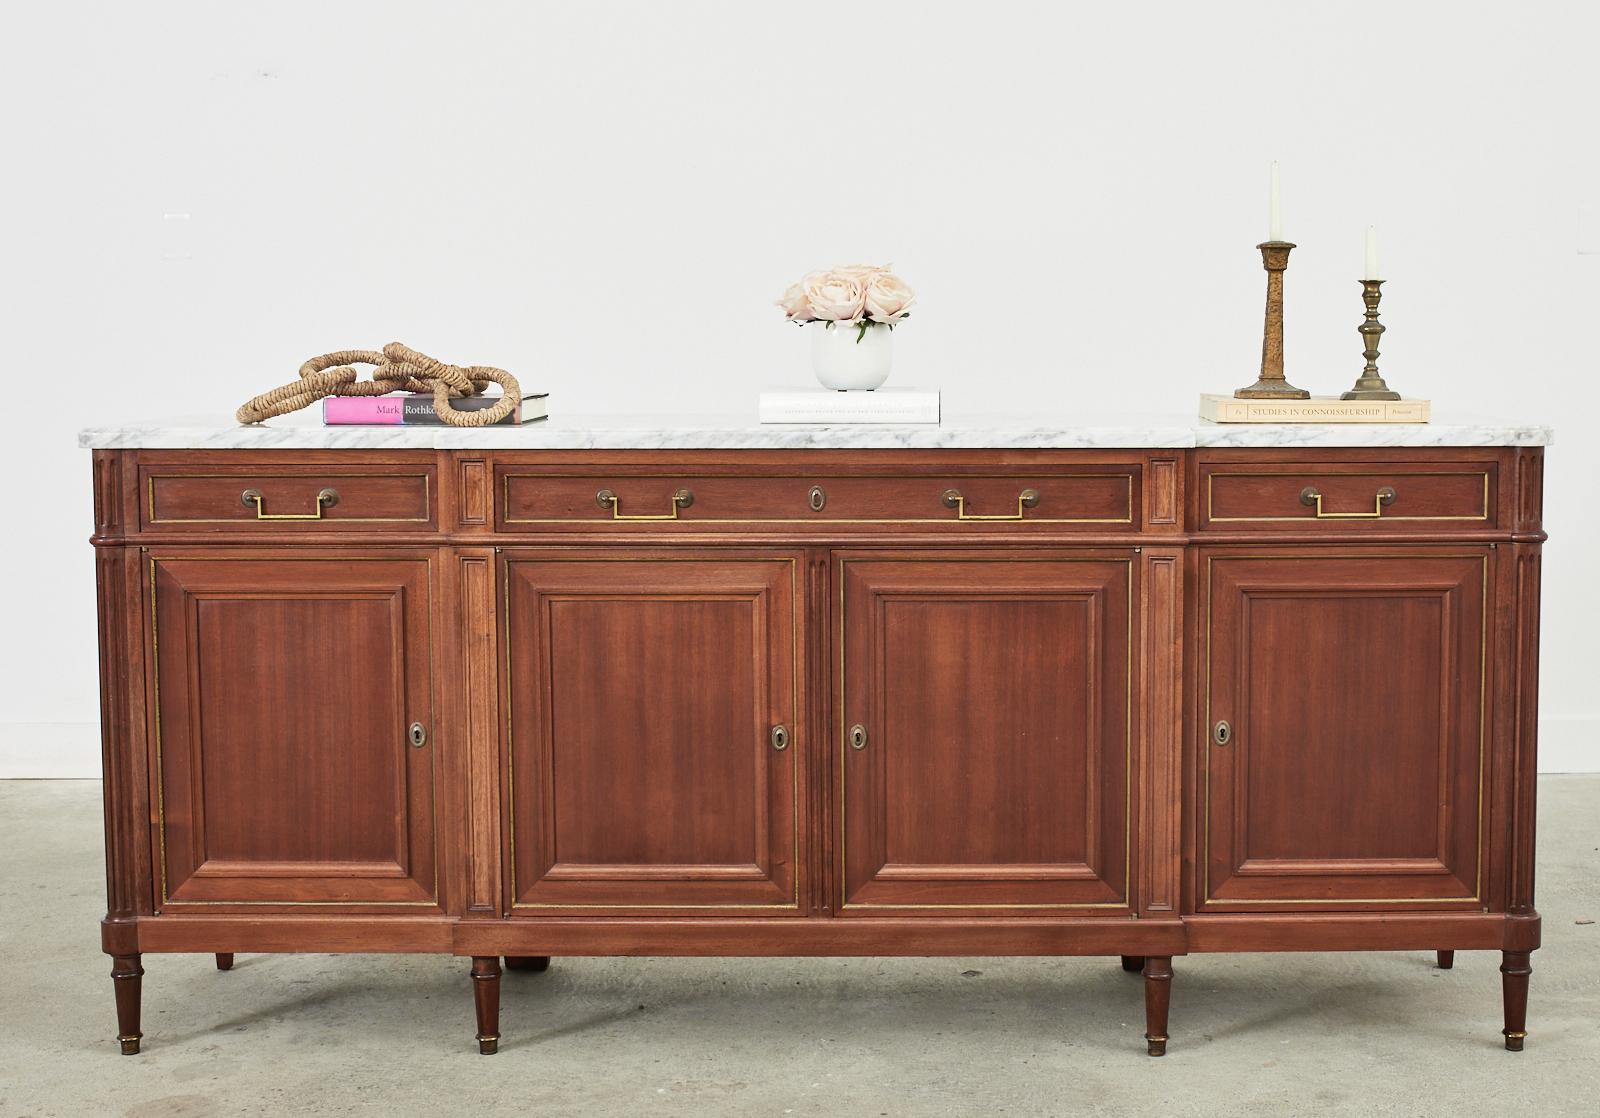 Distinctive French mahogany enfilade sideboard server or buffet featuring a thick Italian Carrara marble top. The rectangular mahogany case is fitted with four storage doors in an enfilade style. The doors and drawers are fitted with bronze